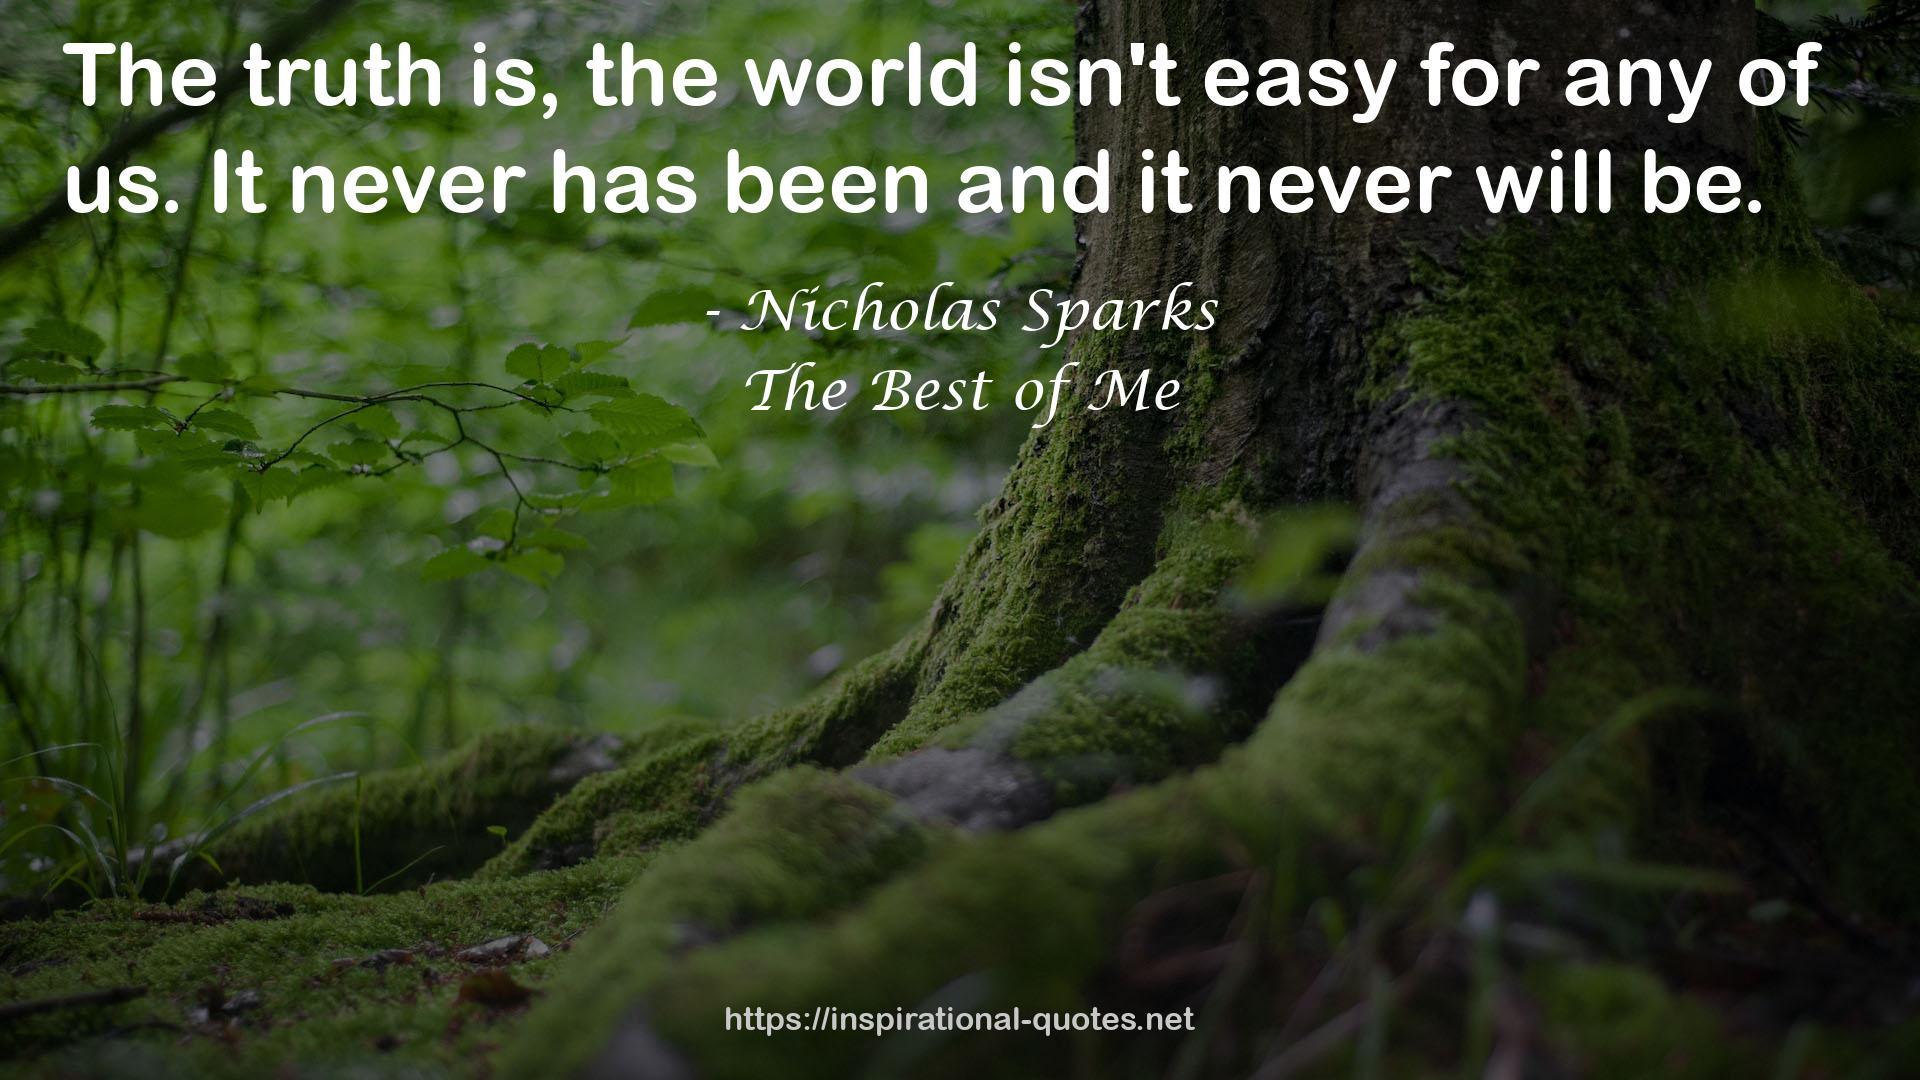 The Best of Me QUOTES